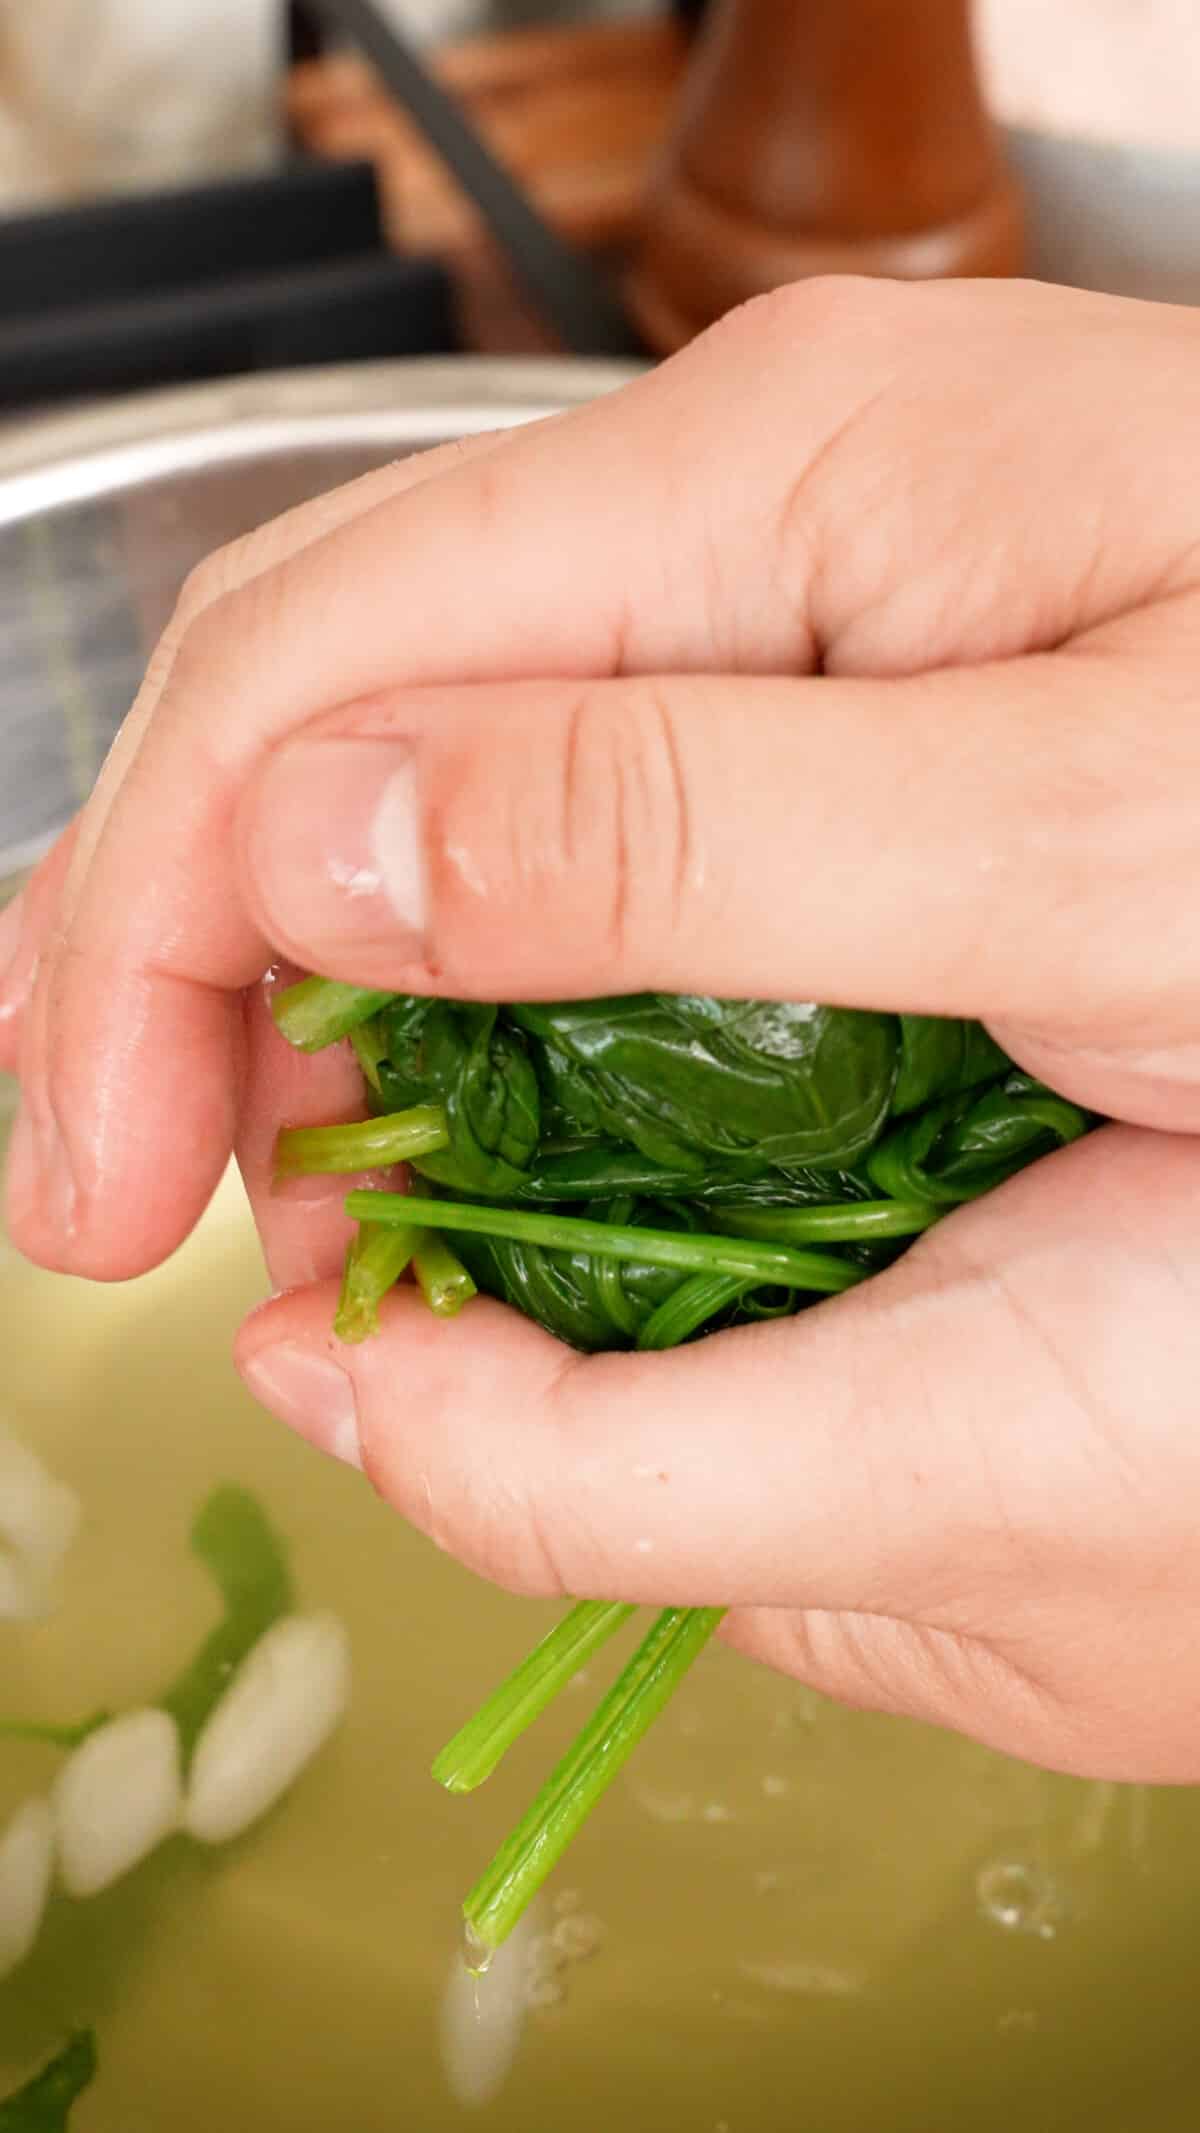 Hands squeezing blanched spinach to remove excess water.